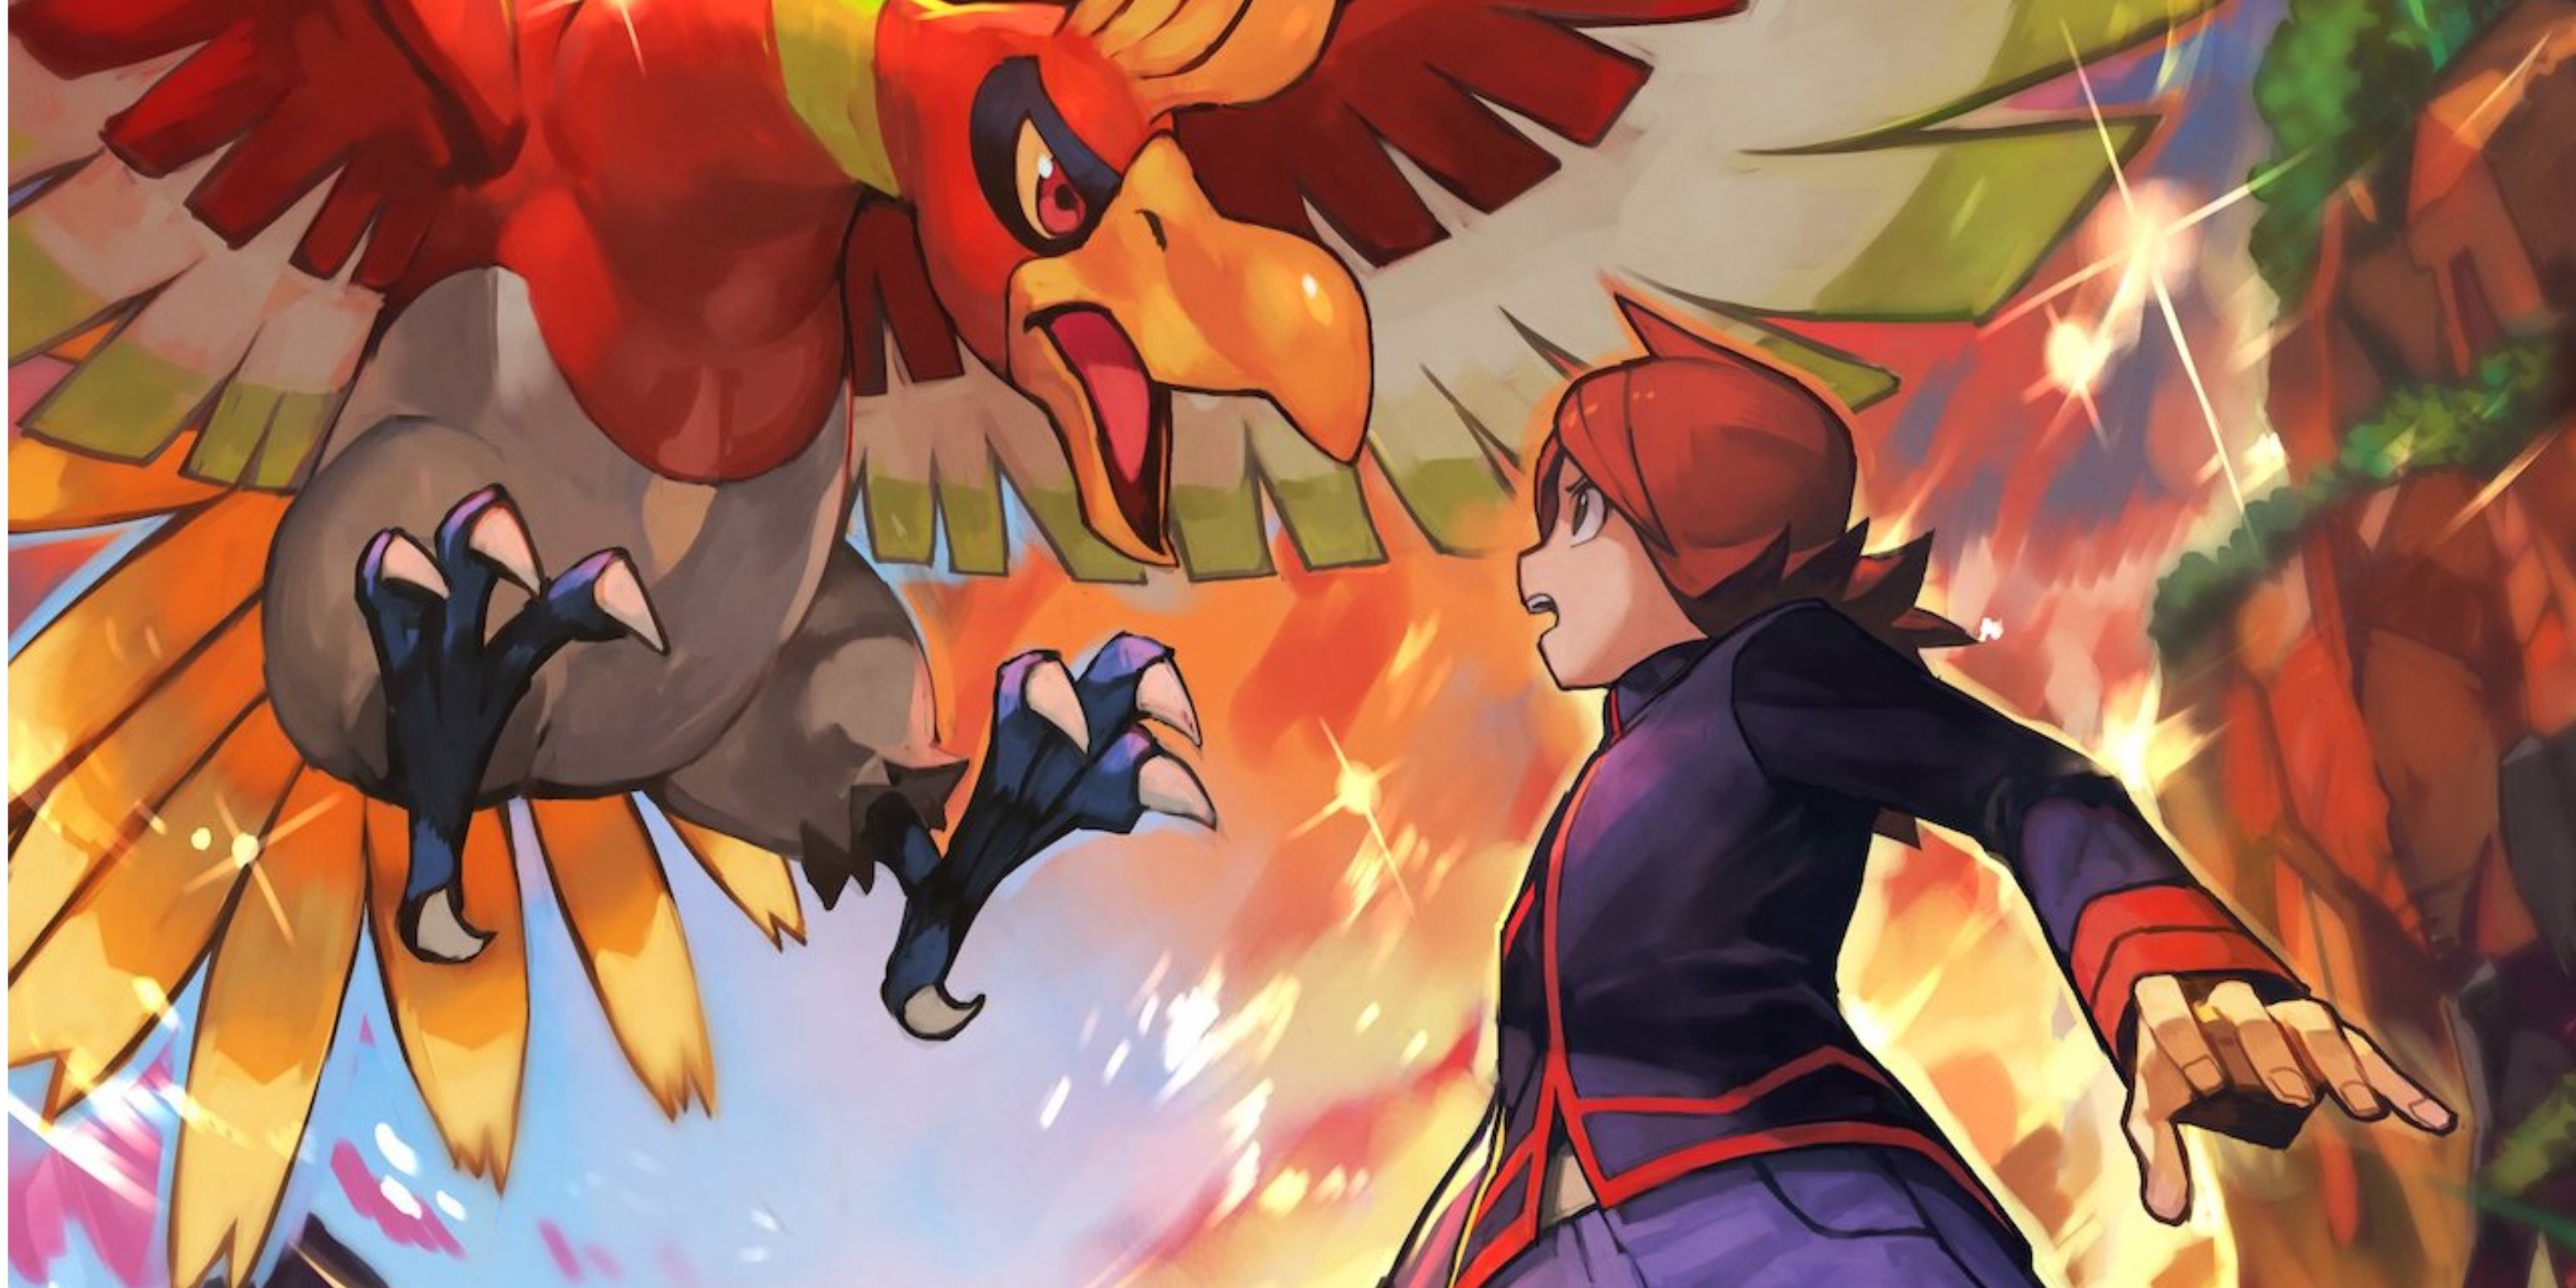 Rival character Silver with Ho-oh